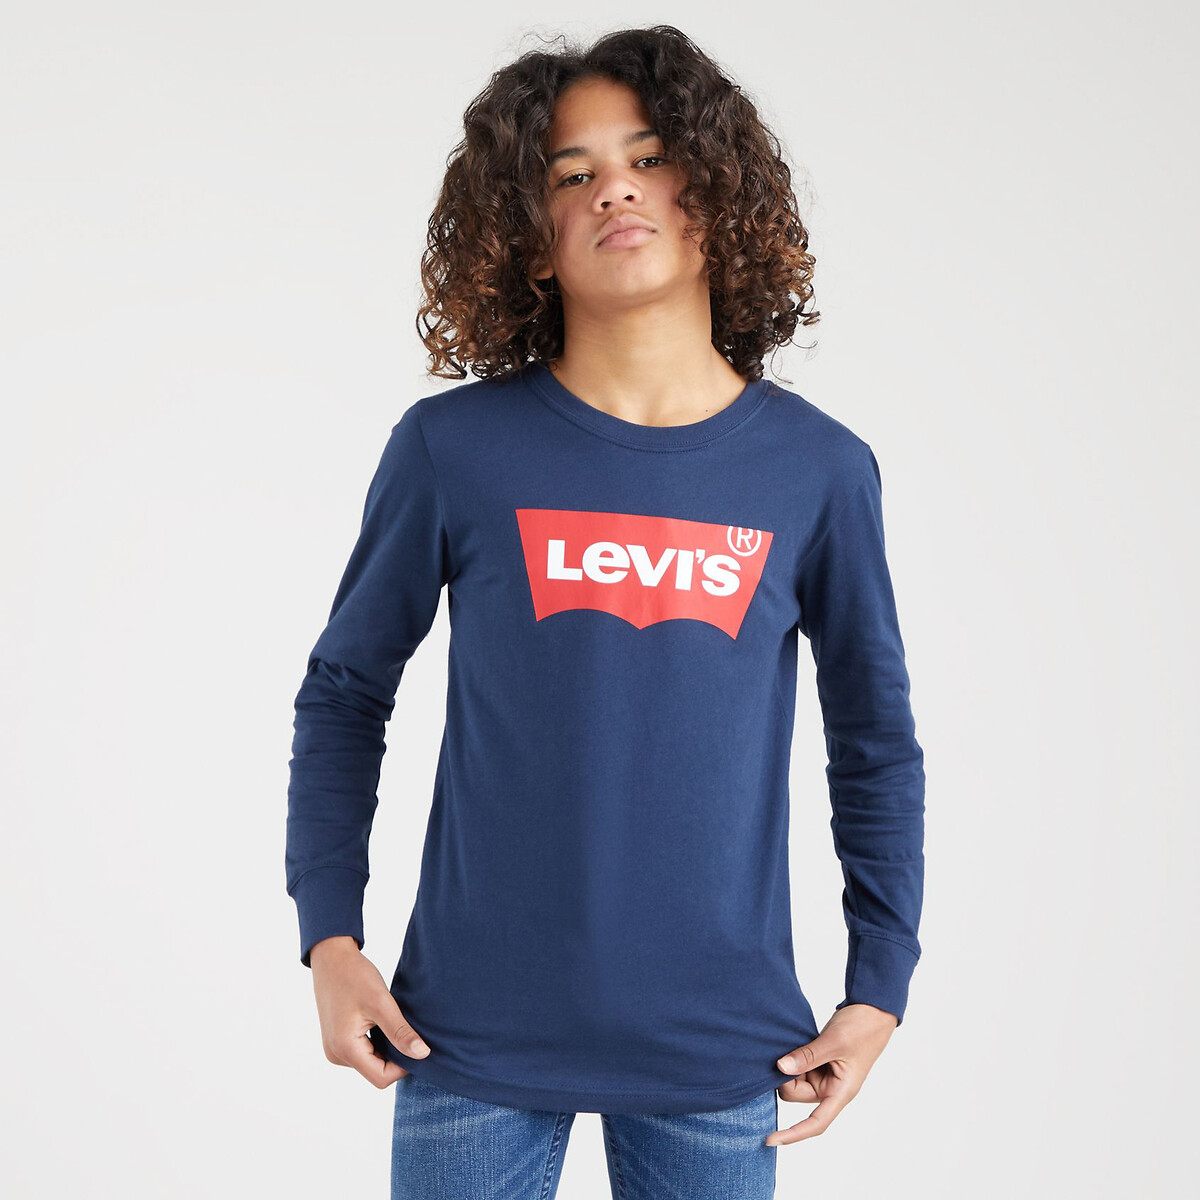 Cotton long-sleeved t-shirt, 6 months-2 years, navy blue, Levi's Kids ...